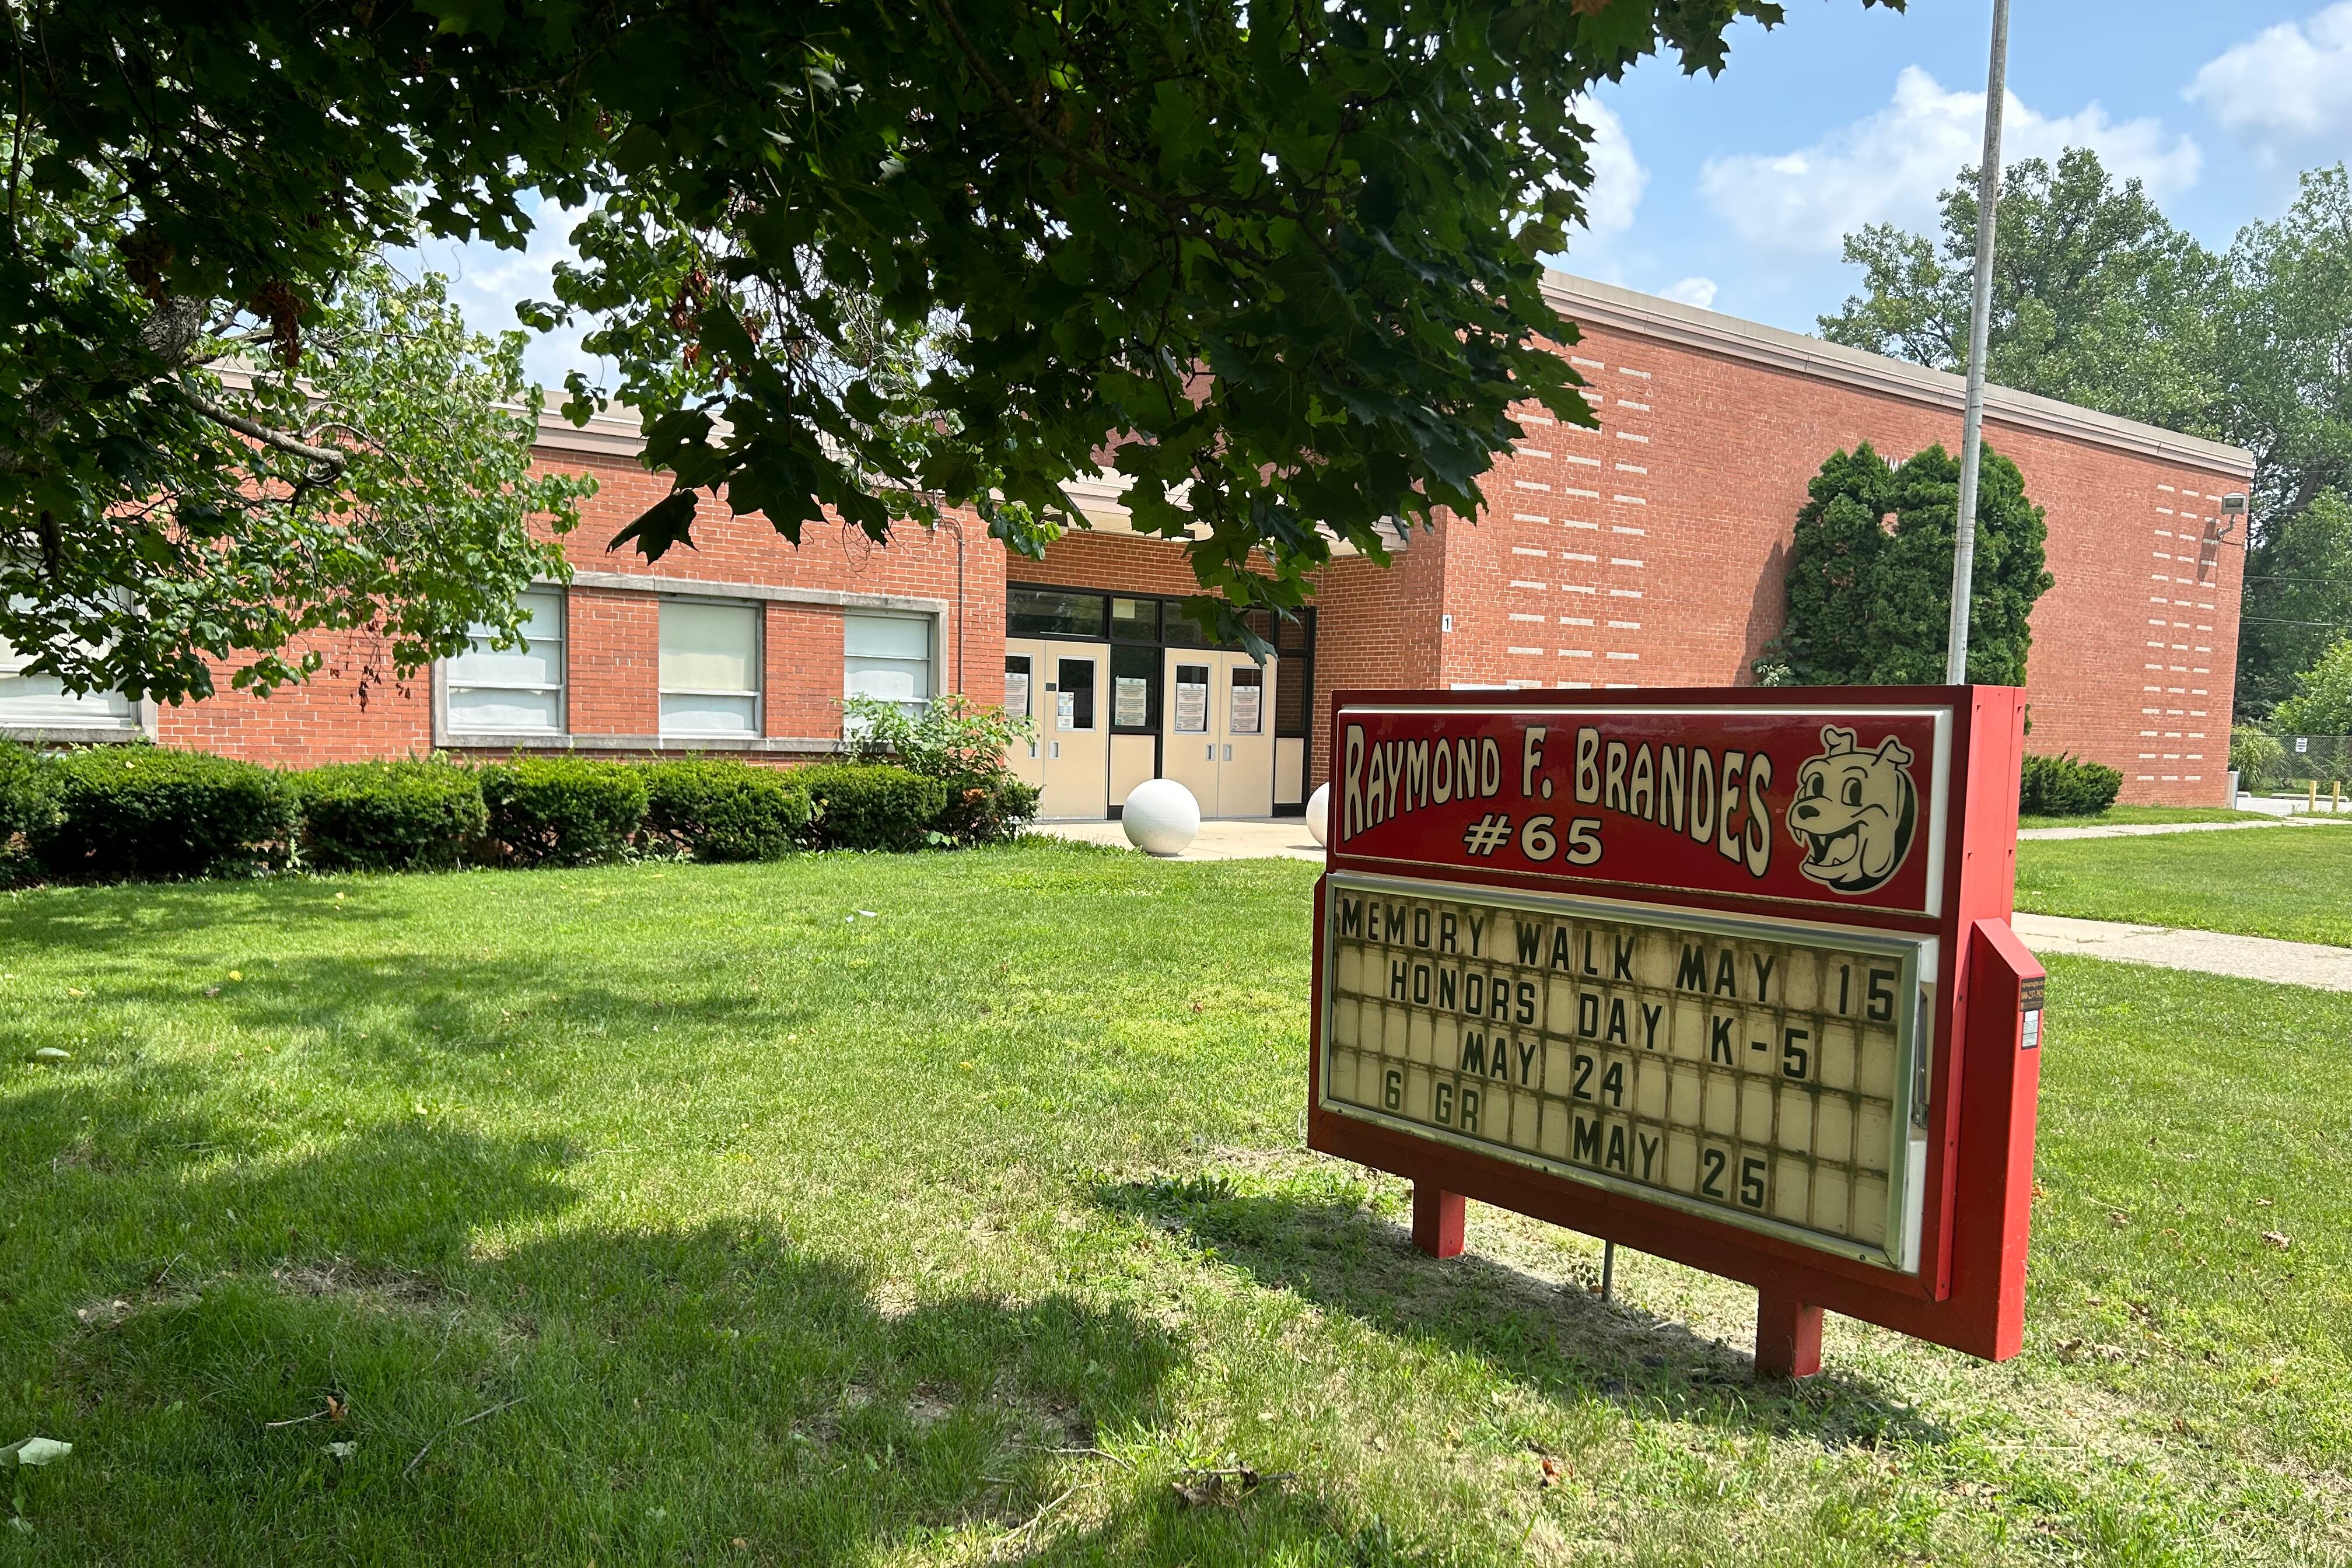 A sign reading “Raymond F. Brandes number 65” sits in a green lawn with a brick building in the background.